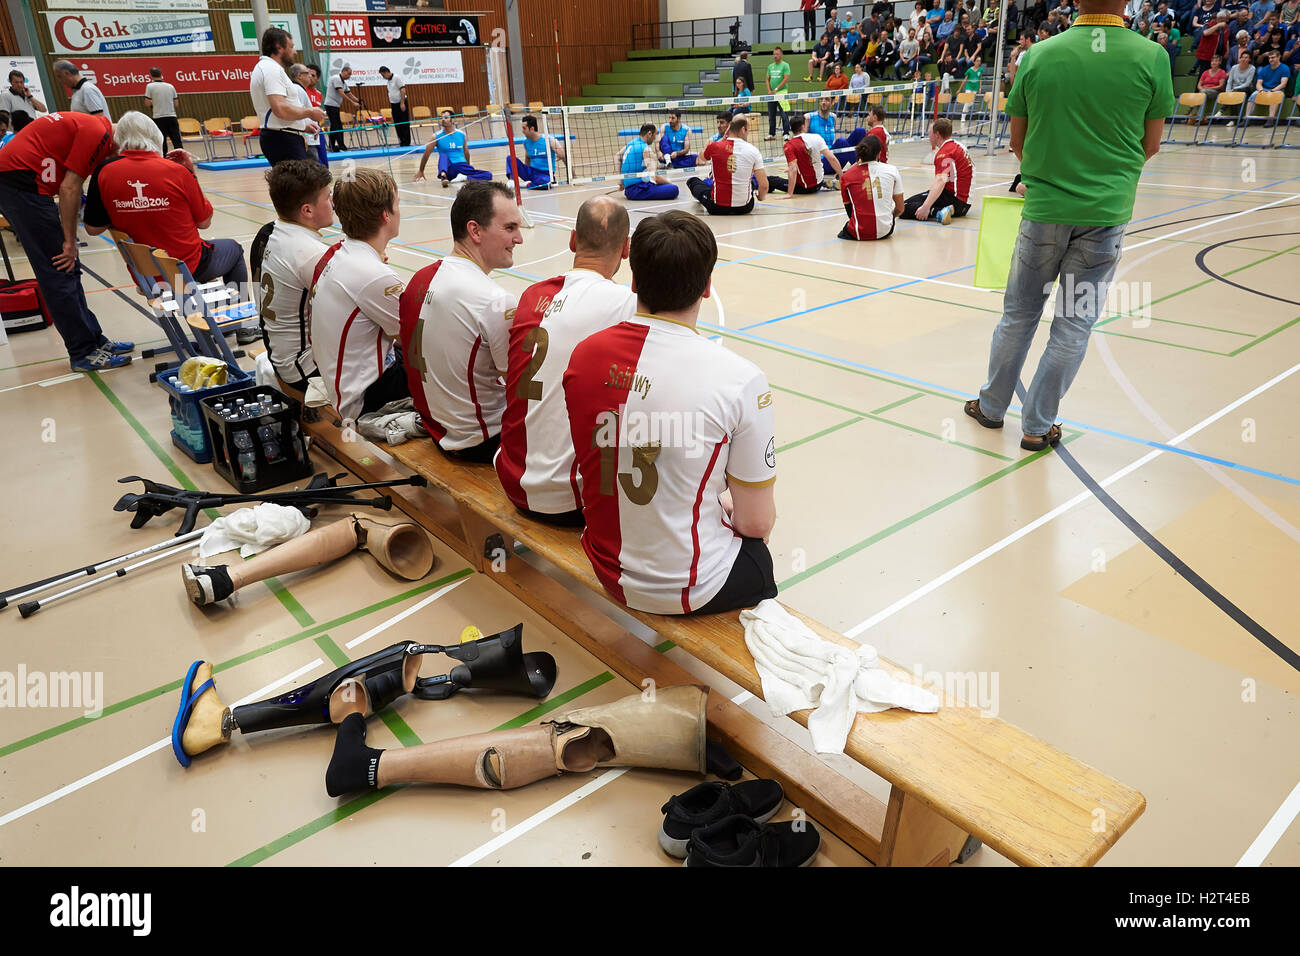 Disabled sport, sitting volleyball, game between Germany and Iran, Koblenz, Rhineland-Palatinate, Germany Stock Photo